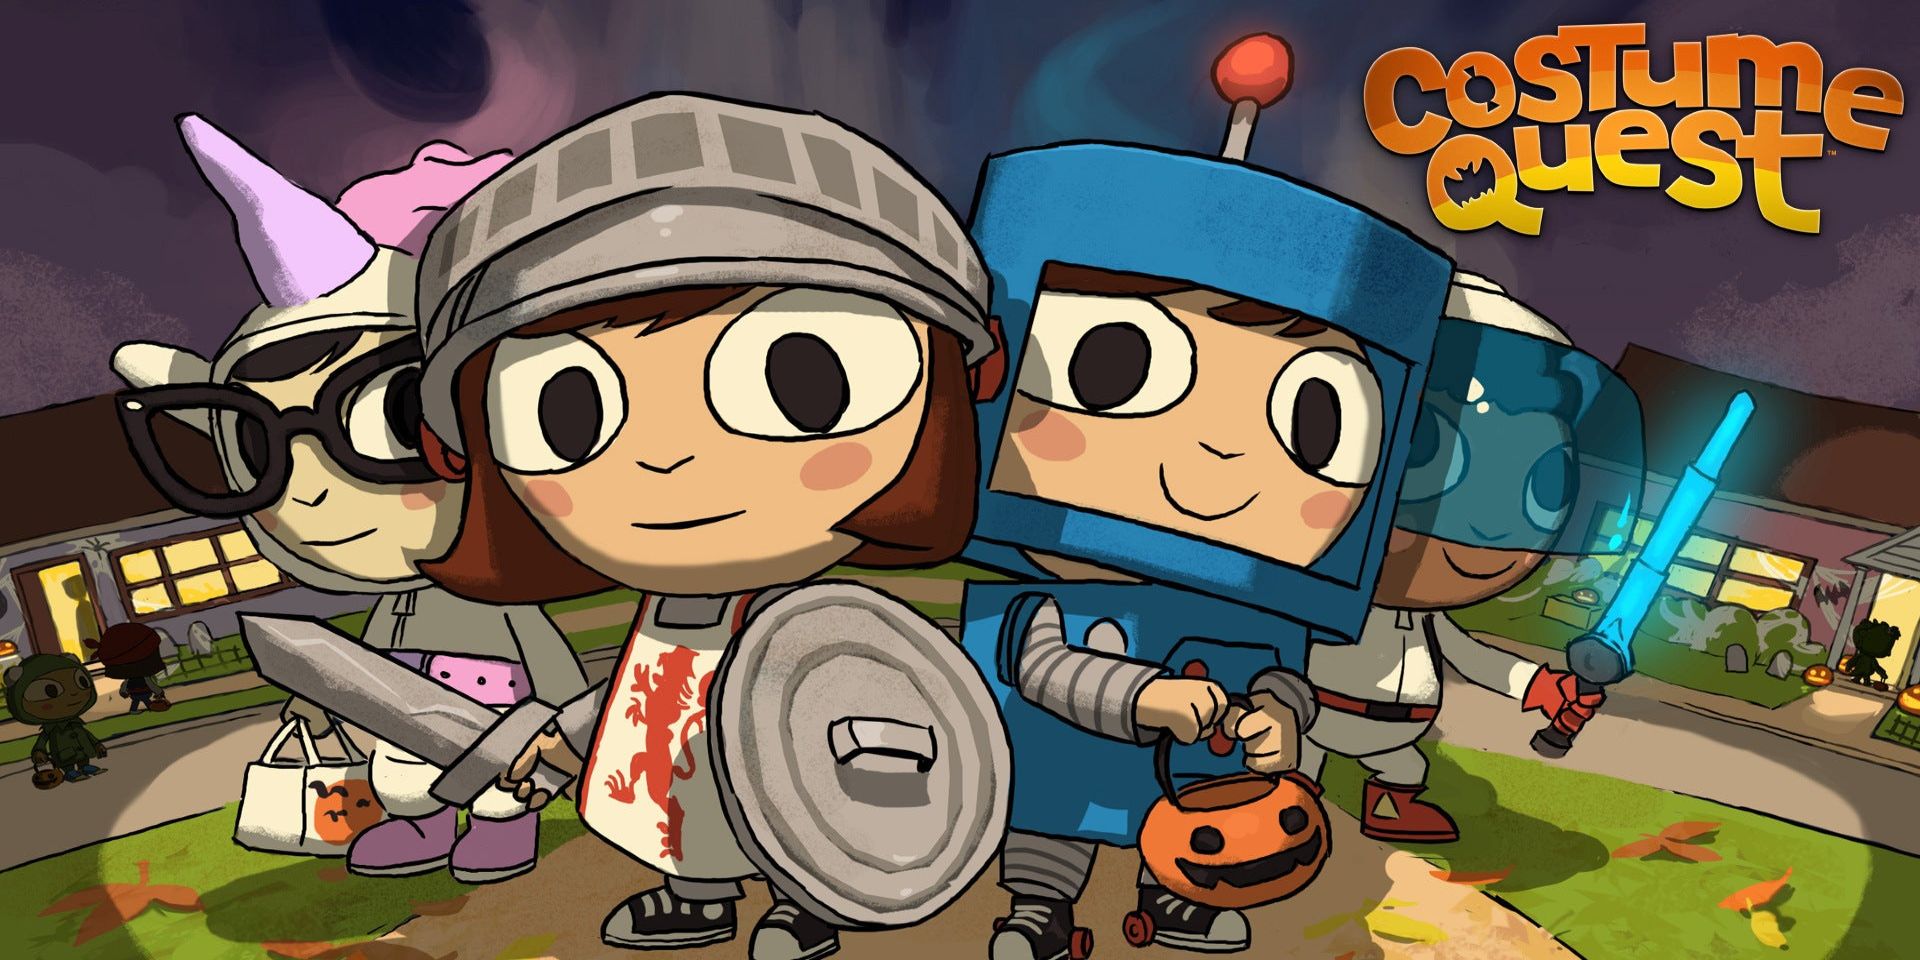 Promotional art for the 2011 video game Costume Quest.